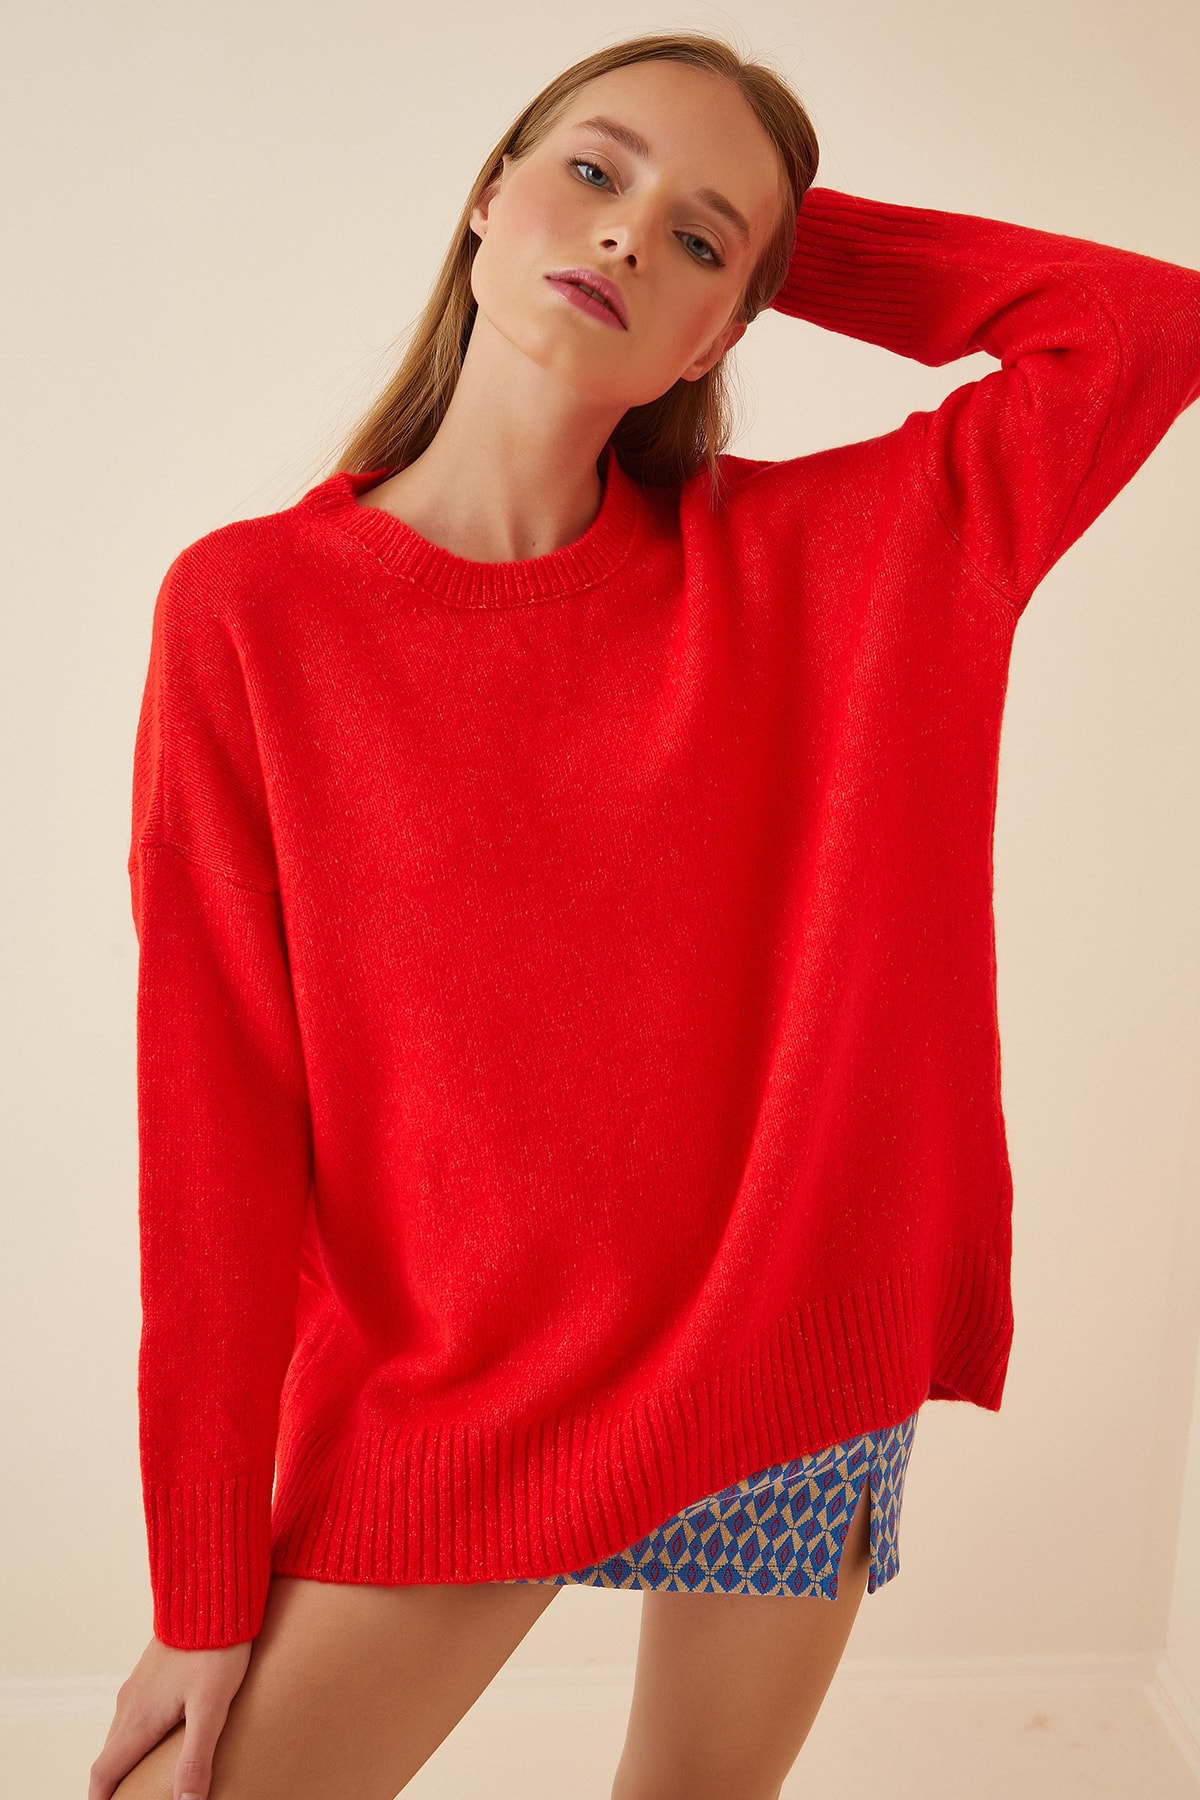 Levně Happiness İstanbul Women's Vibrant Red Oversized Knitwear Sweater